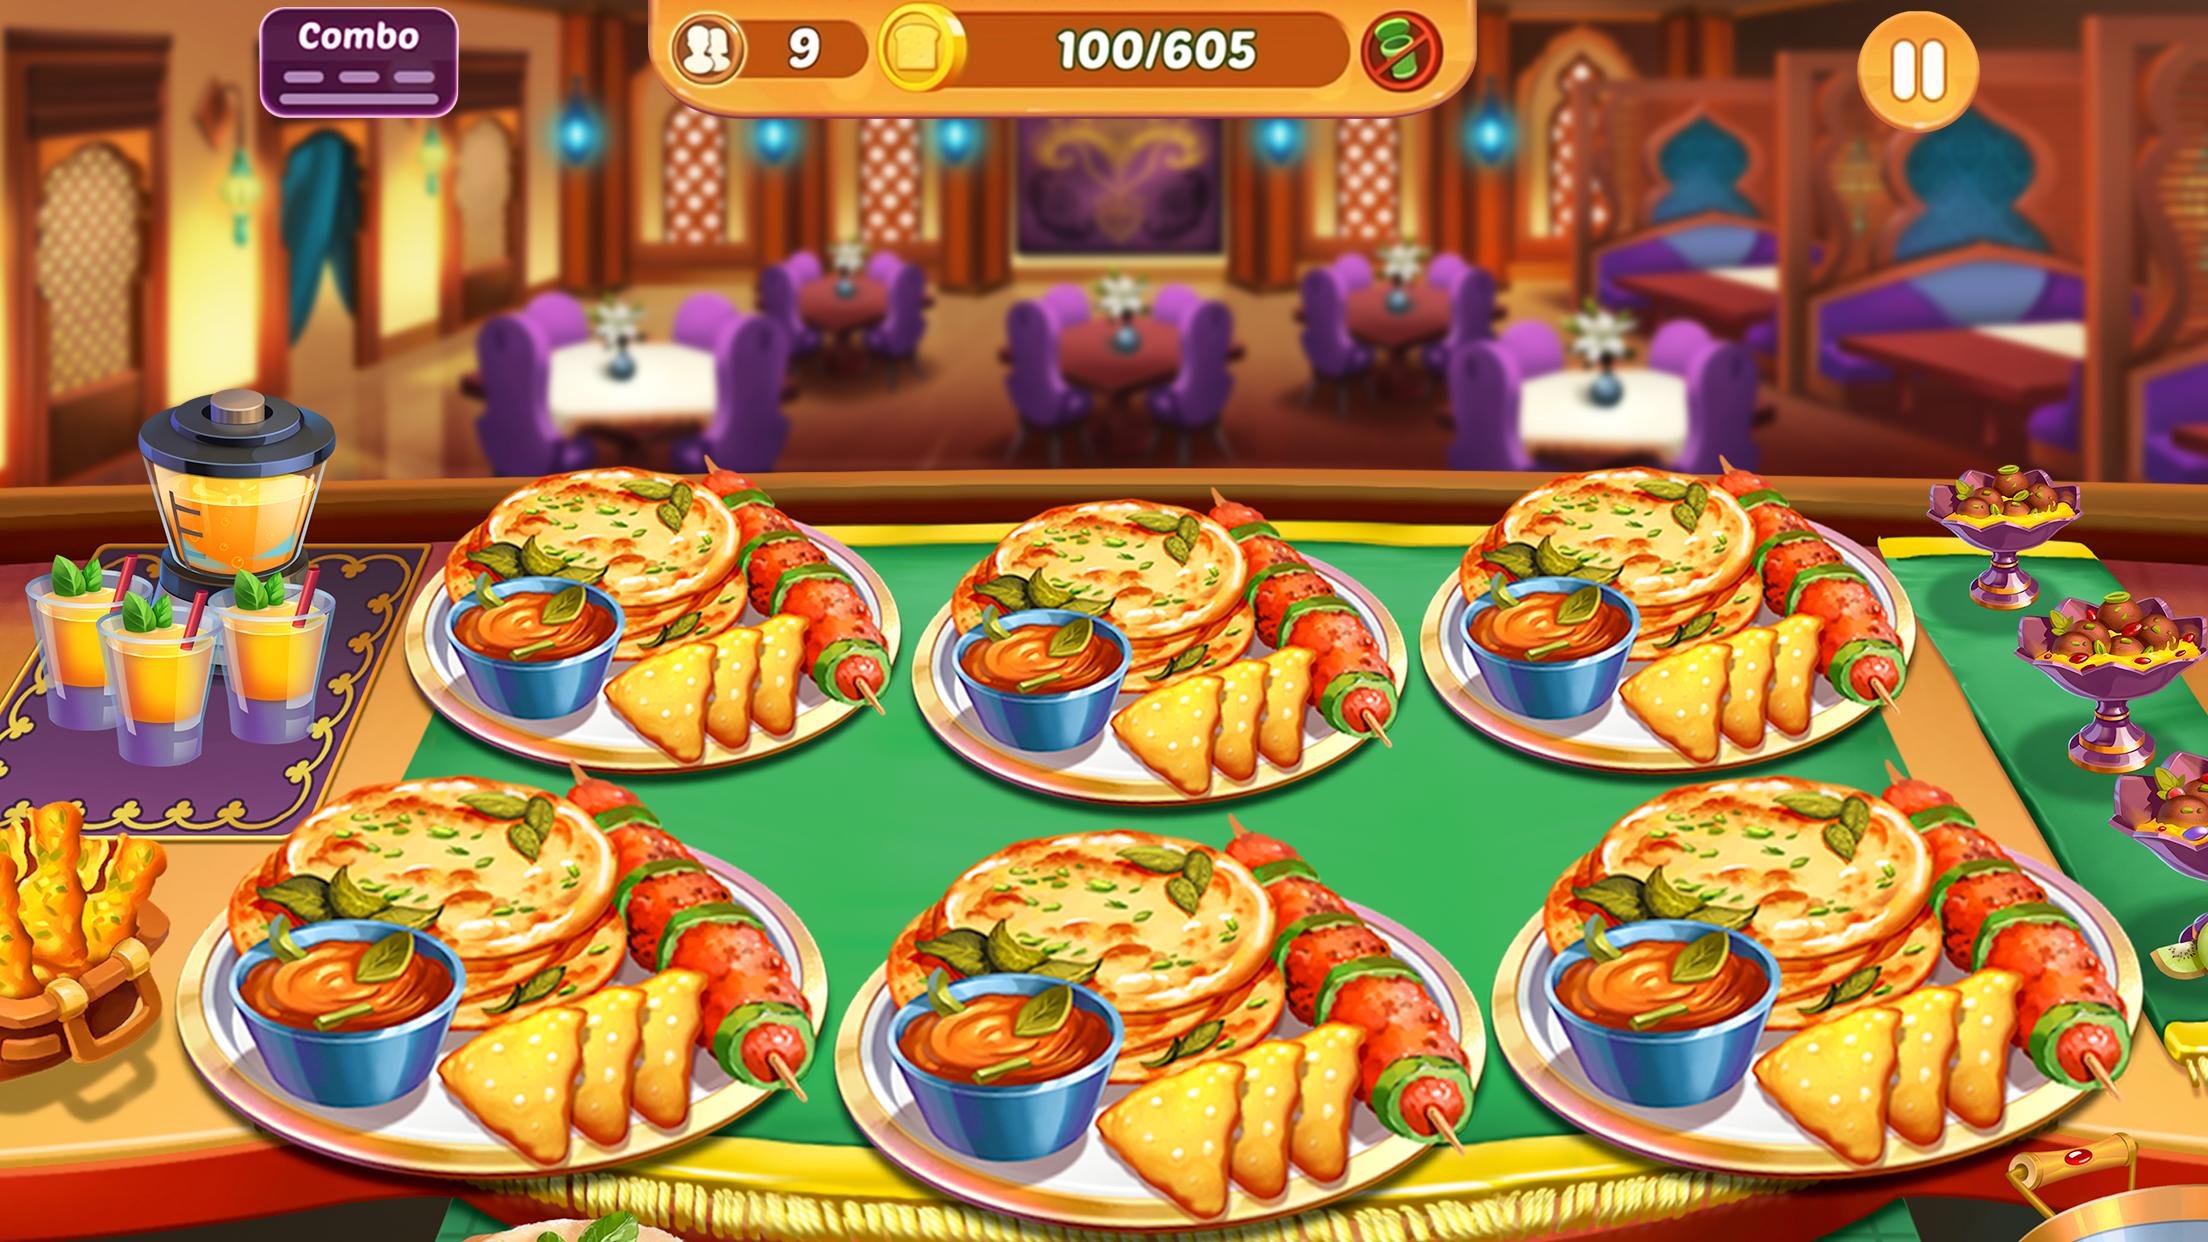 Cooking Crush Cooking Games Madness - Frenzy City 1.2.4 Screenshot 3